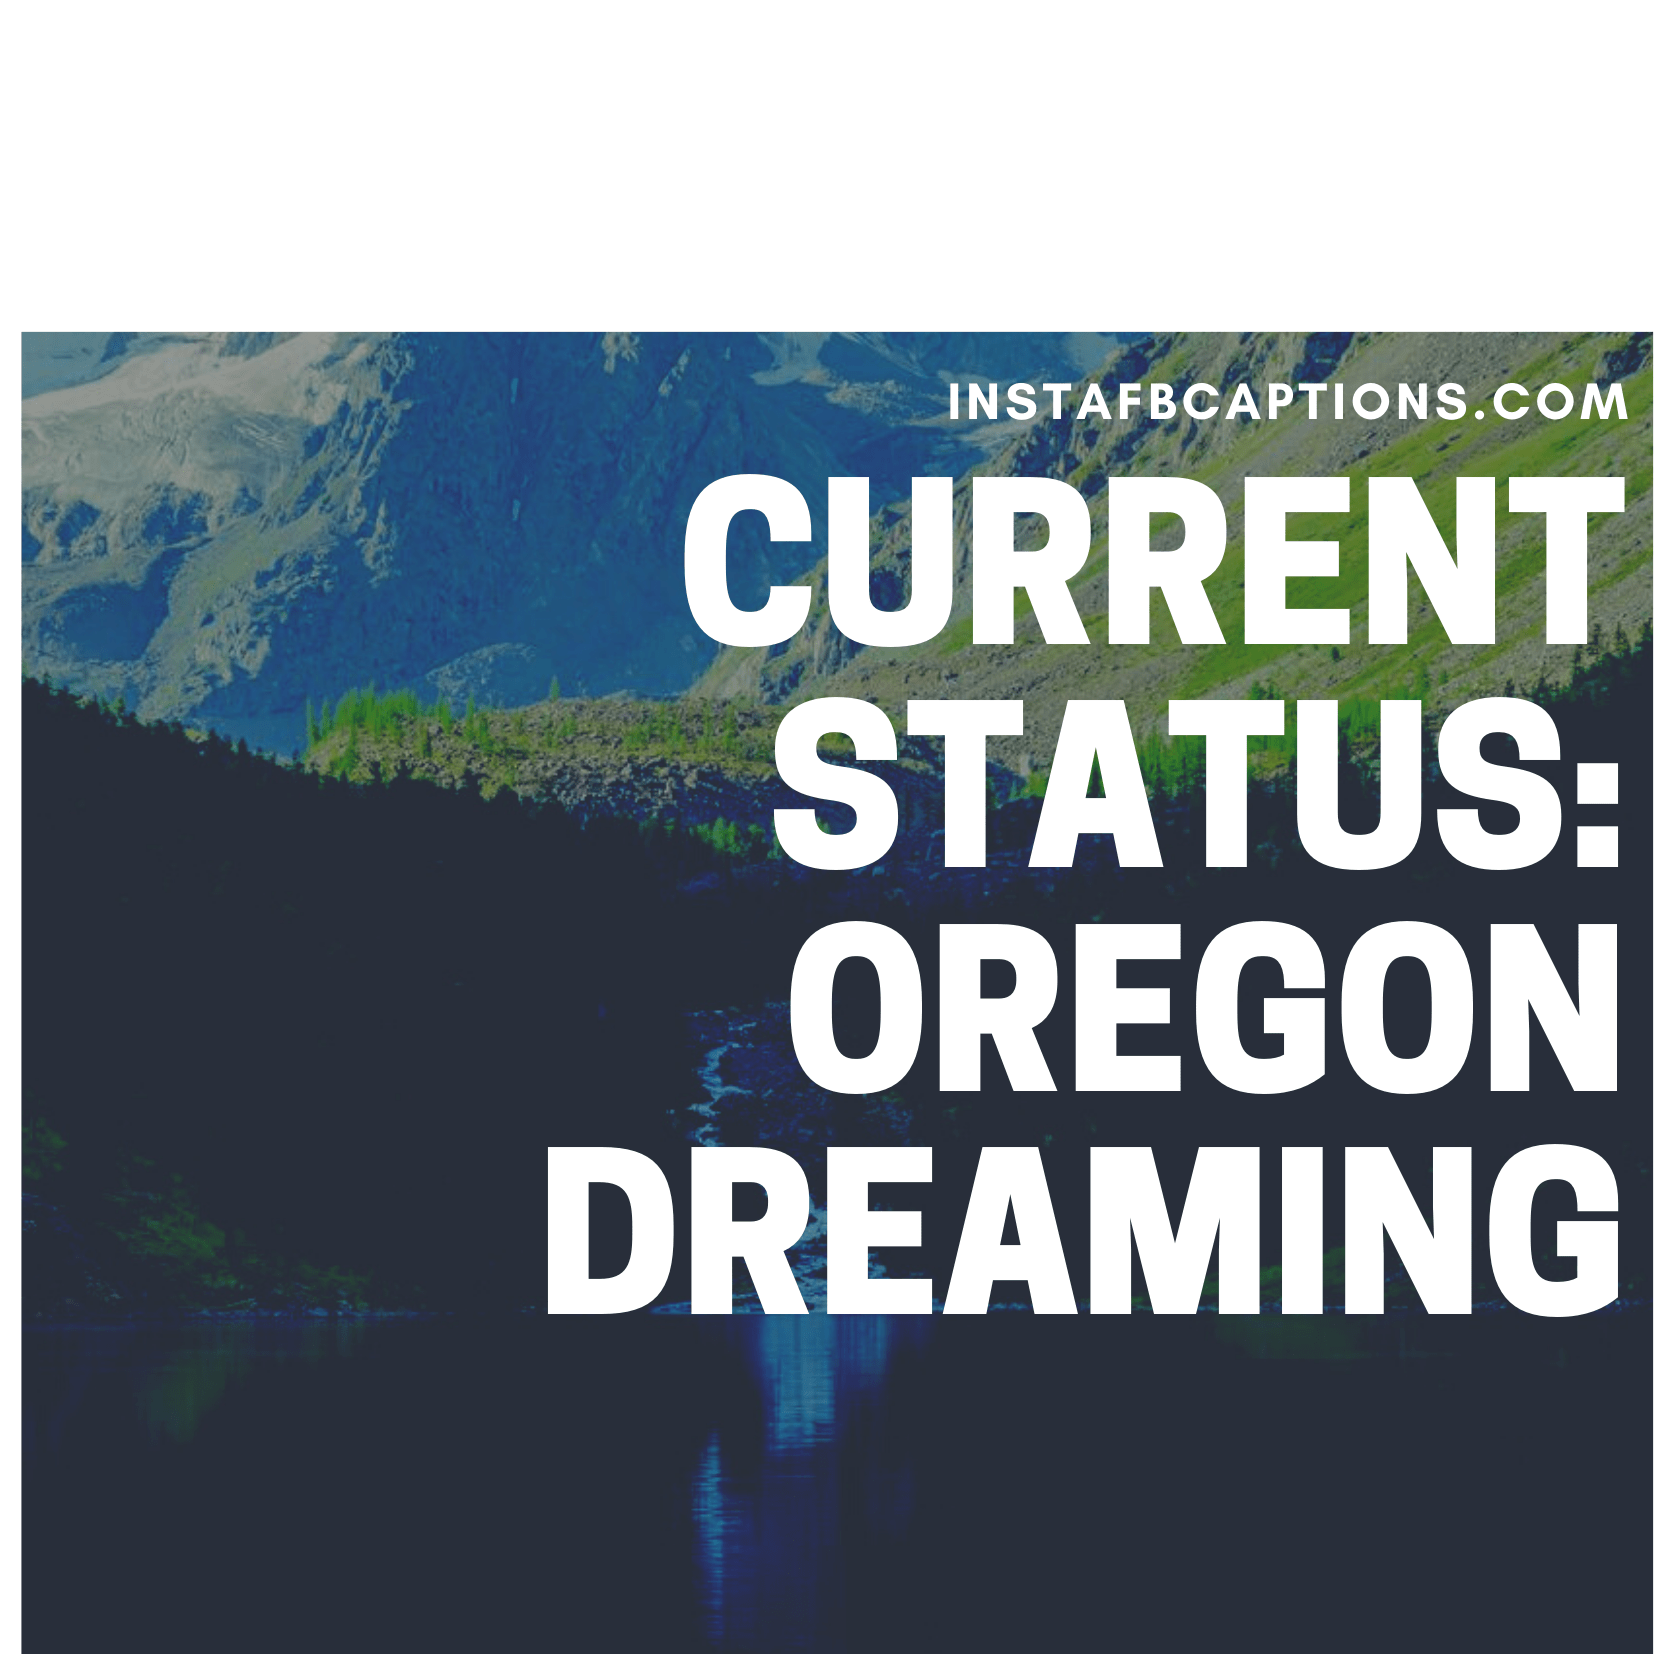 Famous Quotes About Orego  - Famous Quotes about Oregon - 72+ Oregon Instagram Captions for Coast Pics in 2022